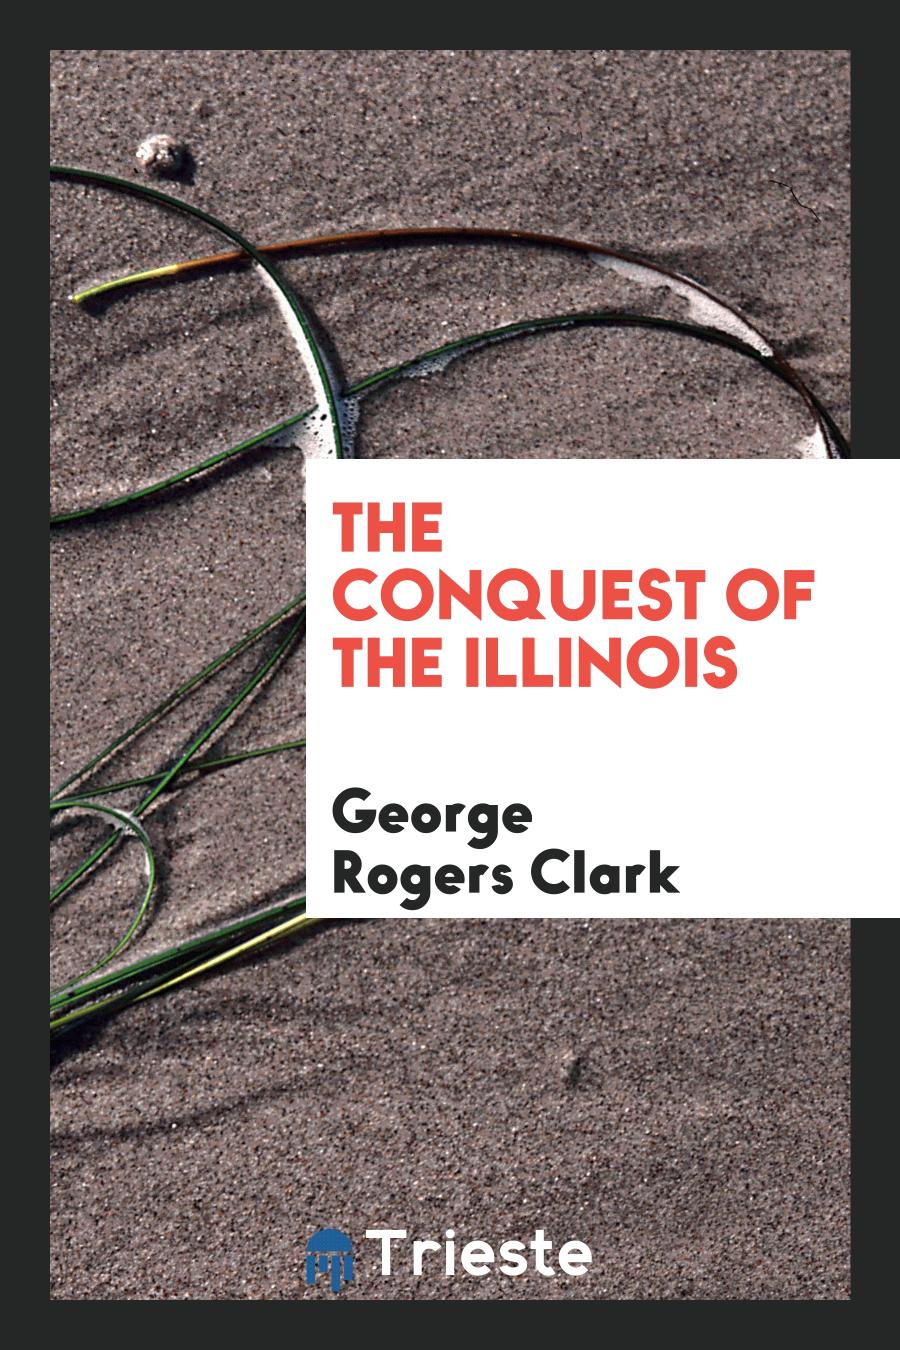 The conquest of the Illinois